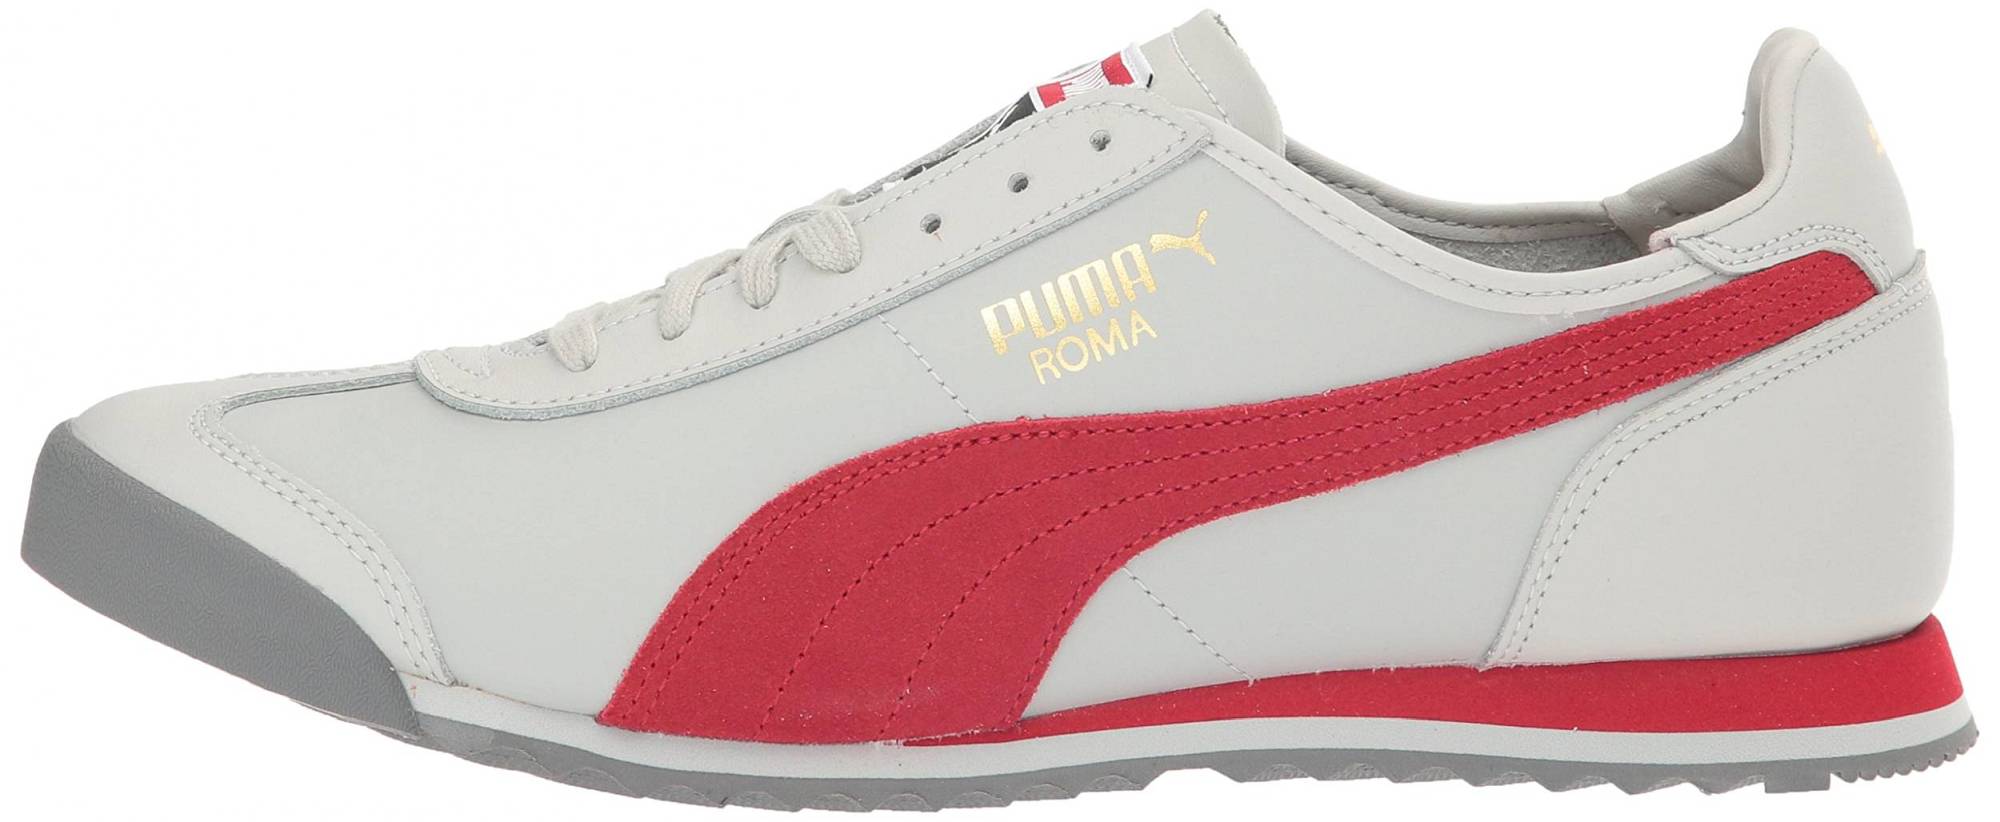 Puma Roma OG 80s – Shoes Reviews & Reasons To Buy